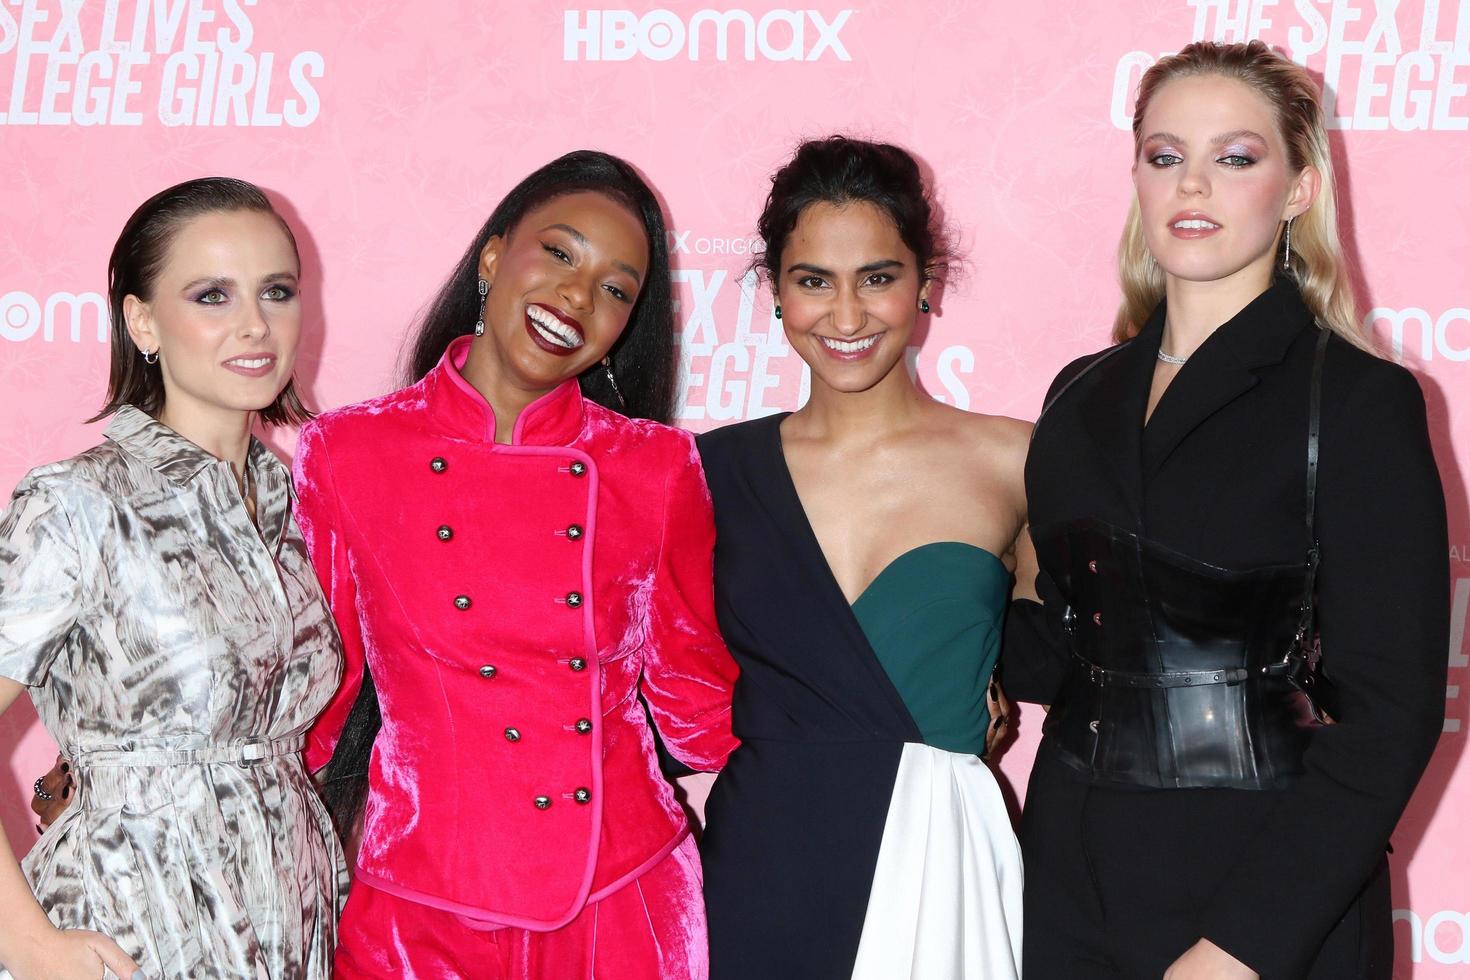 LOS ANGELES  NOV 10 - Pauline Chalamet, Alyah Chanelle Scott, Amrit Kaur, Renee Rapp at the The Sex Lives of College Girls HBO Max Premiere Screening at Armand Hammer Museum on November 10, 2021 in Westwood, CA photo